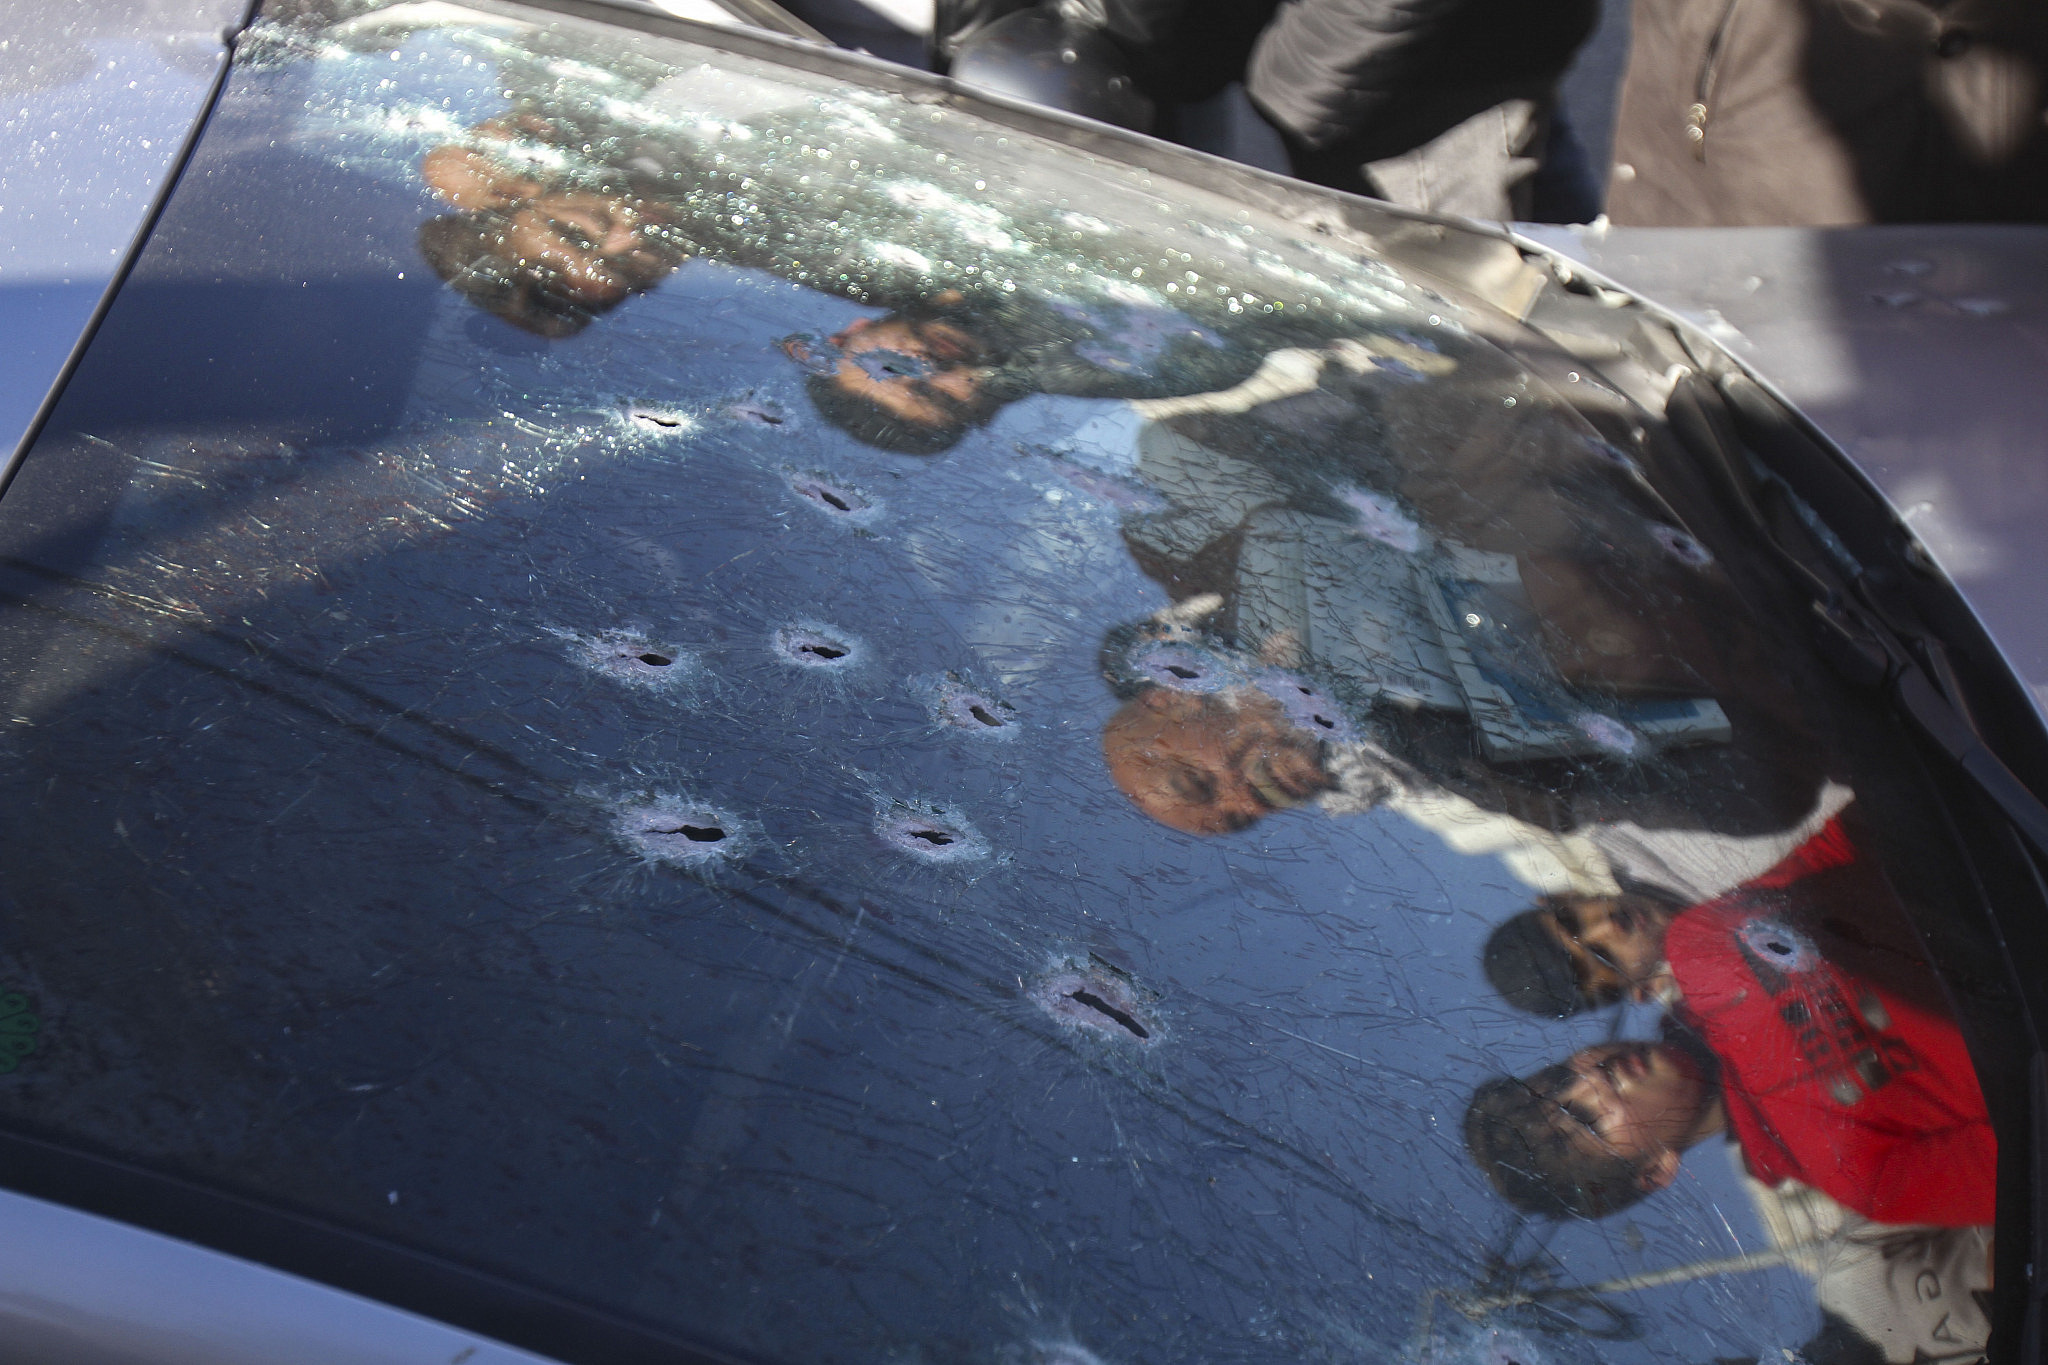 Palestinians look at a car with bullet holes after Israeli security forces killed three Palestinians who were allegedly behind recent shooting attacks against Israeli soldiers and civilians, Nablus, occupied West Bank, February 8, 2022. (Nasser Ishtayeh/Flash90)